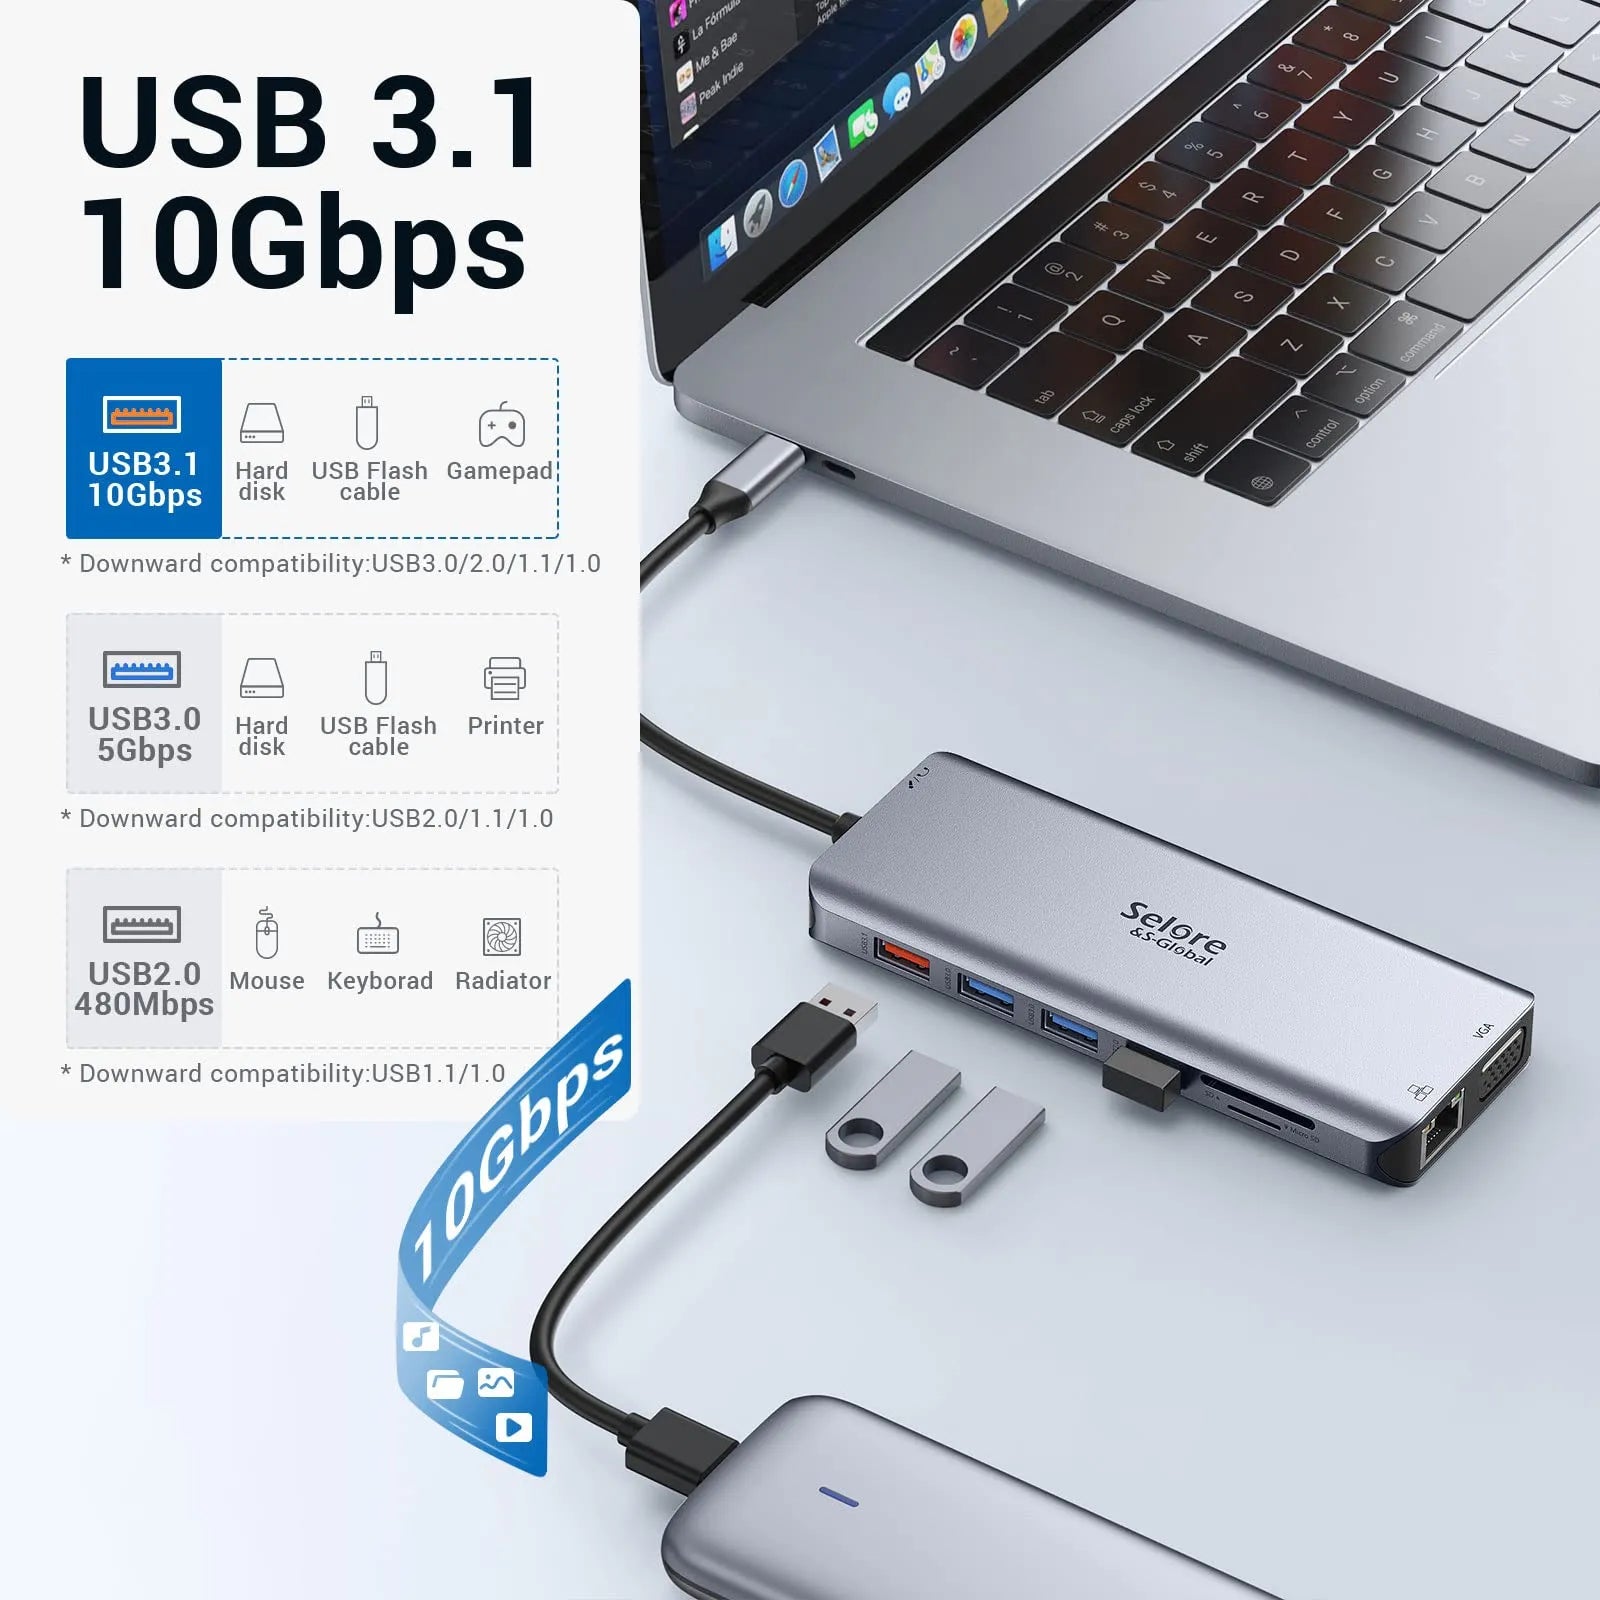 USB-A to VGA Video Adapter - USB 3.0 - Compatible with PC or Mac